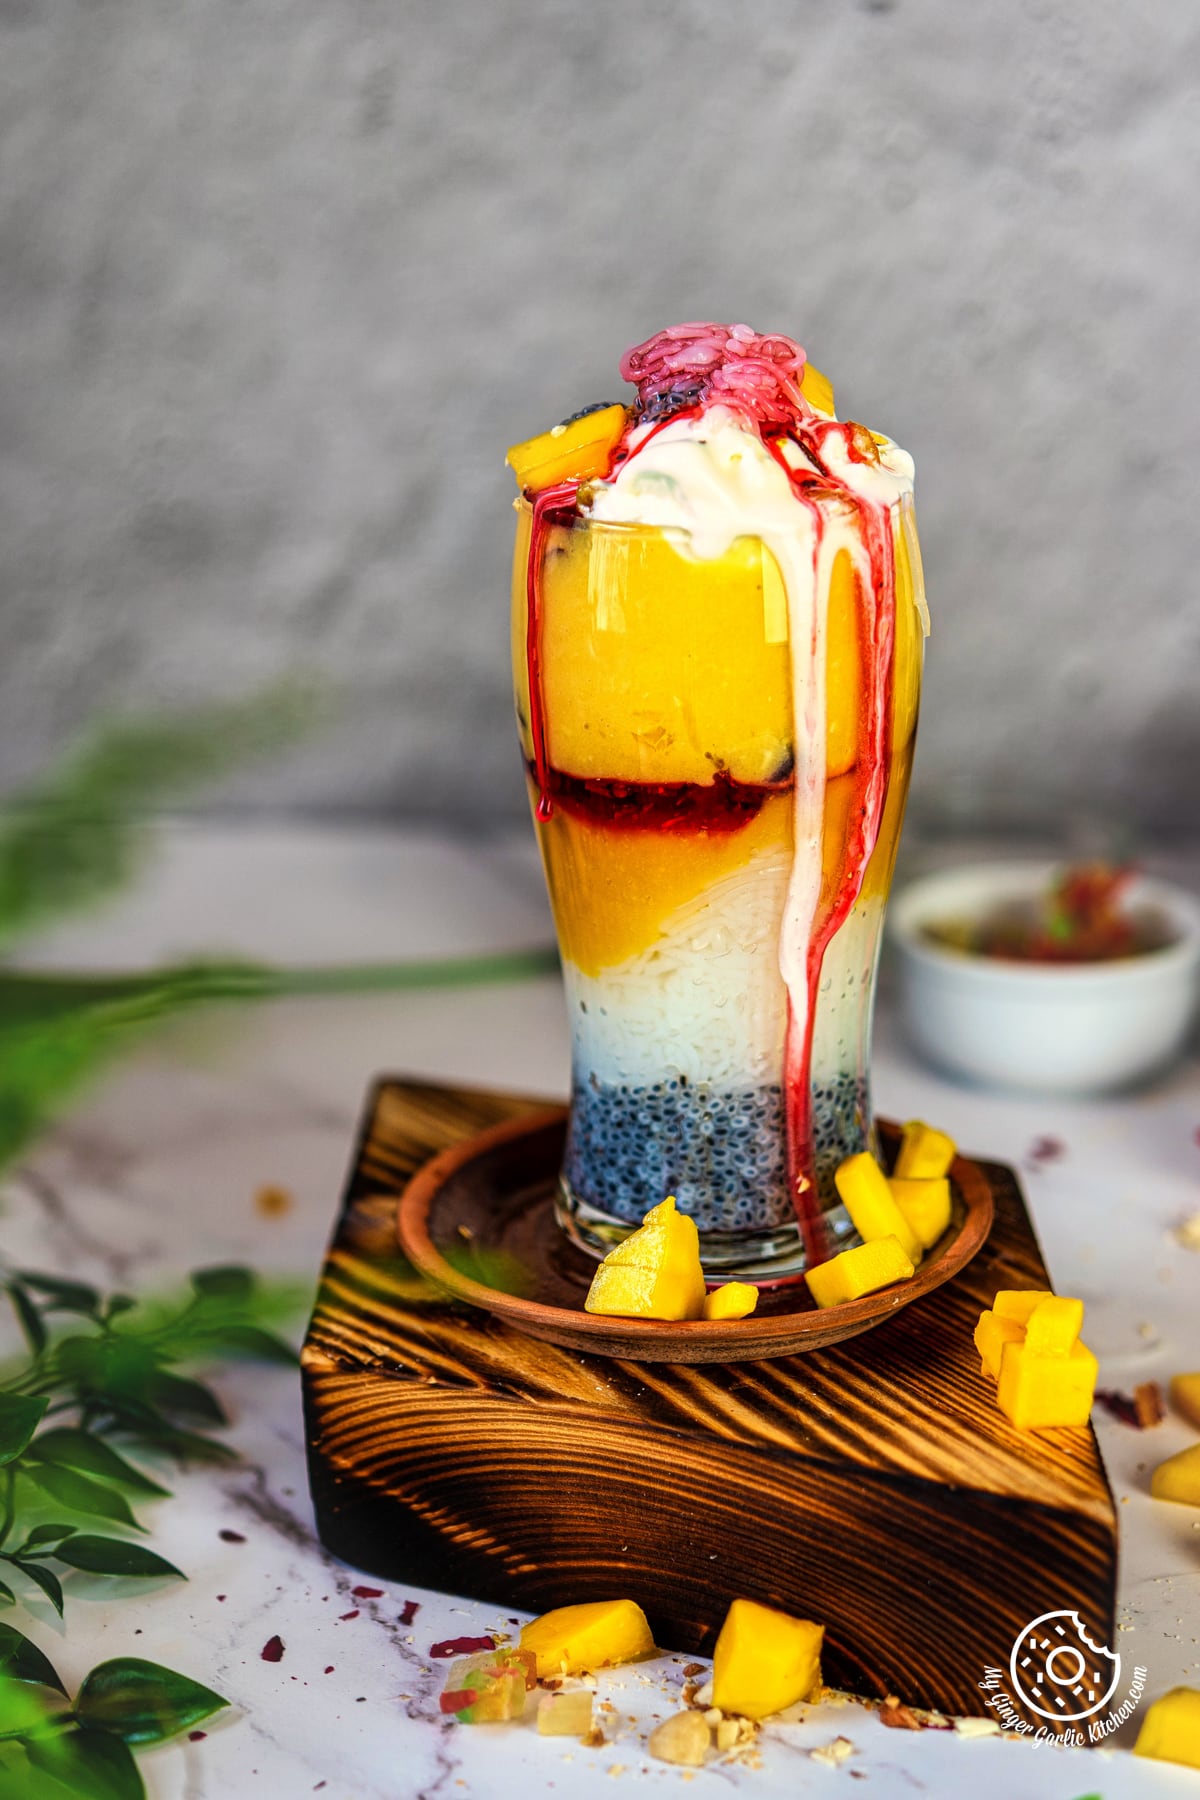 photo of a mango falooda dessert garnished with fruits and ice cream on a wooden tray